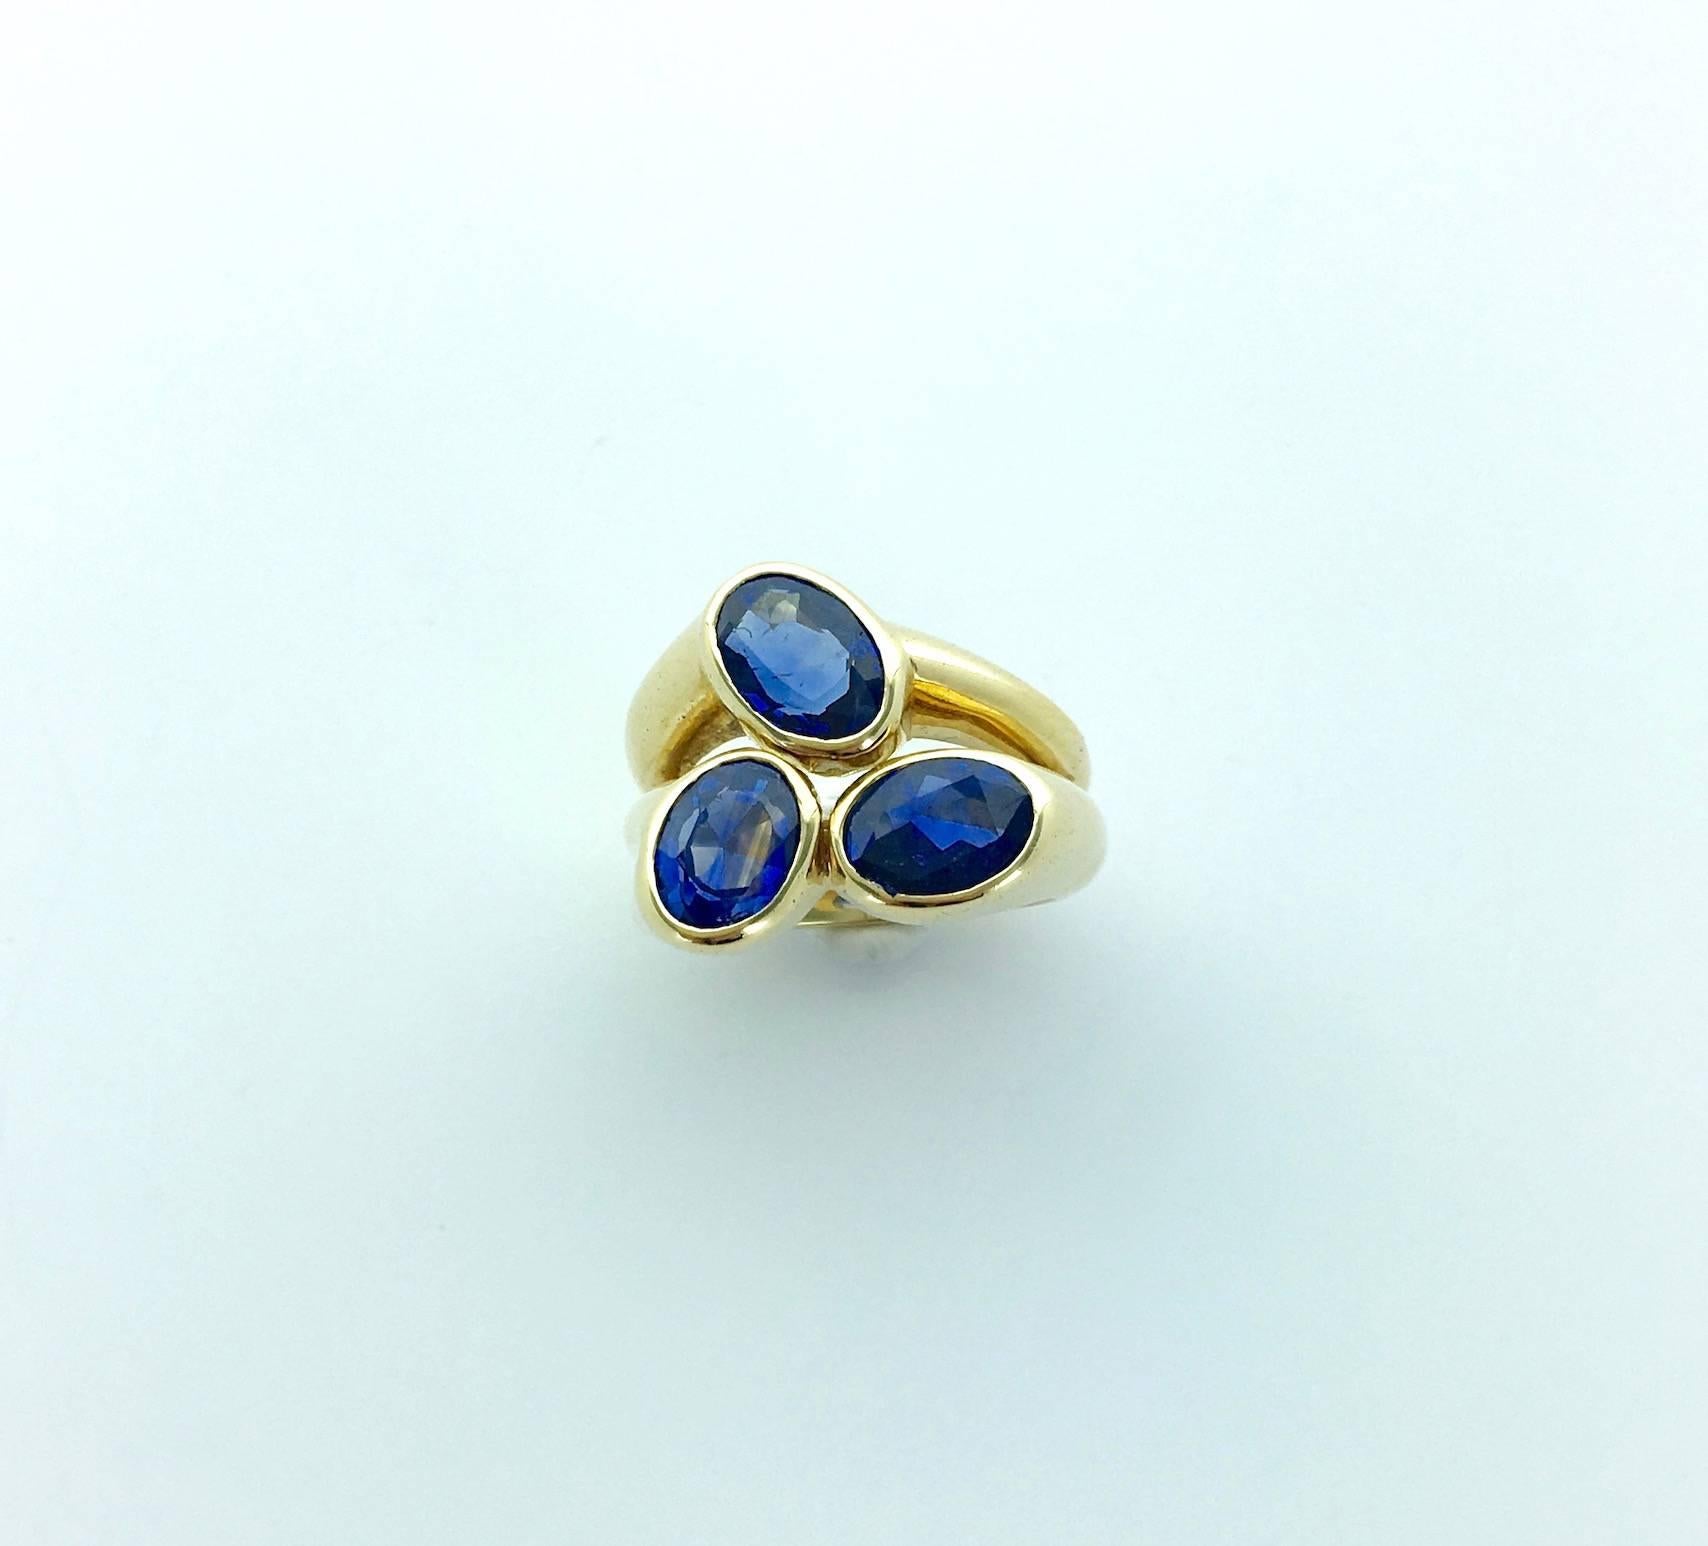 Mid-20th Century design this ring is the testimony of the Avant-Garde design. Three Natural Blue Sapphire gather in asymmetric way.
Circa 1960.

Gross weight: 18.62 grams.